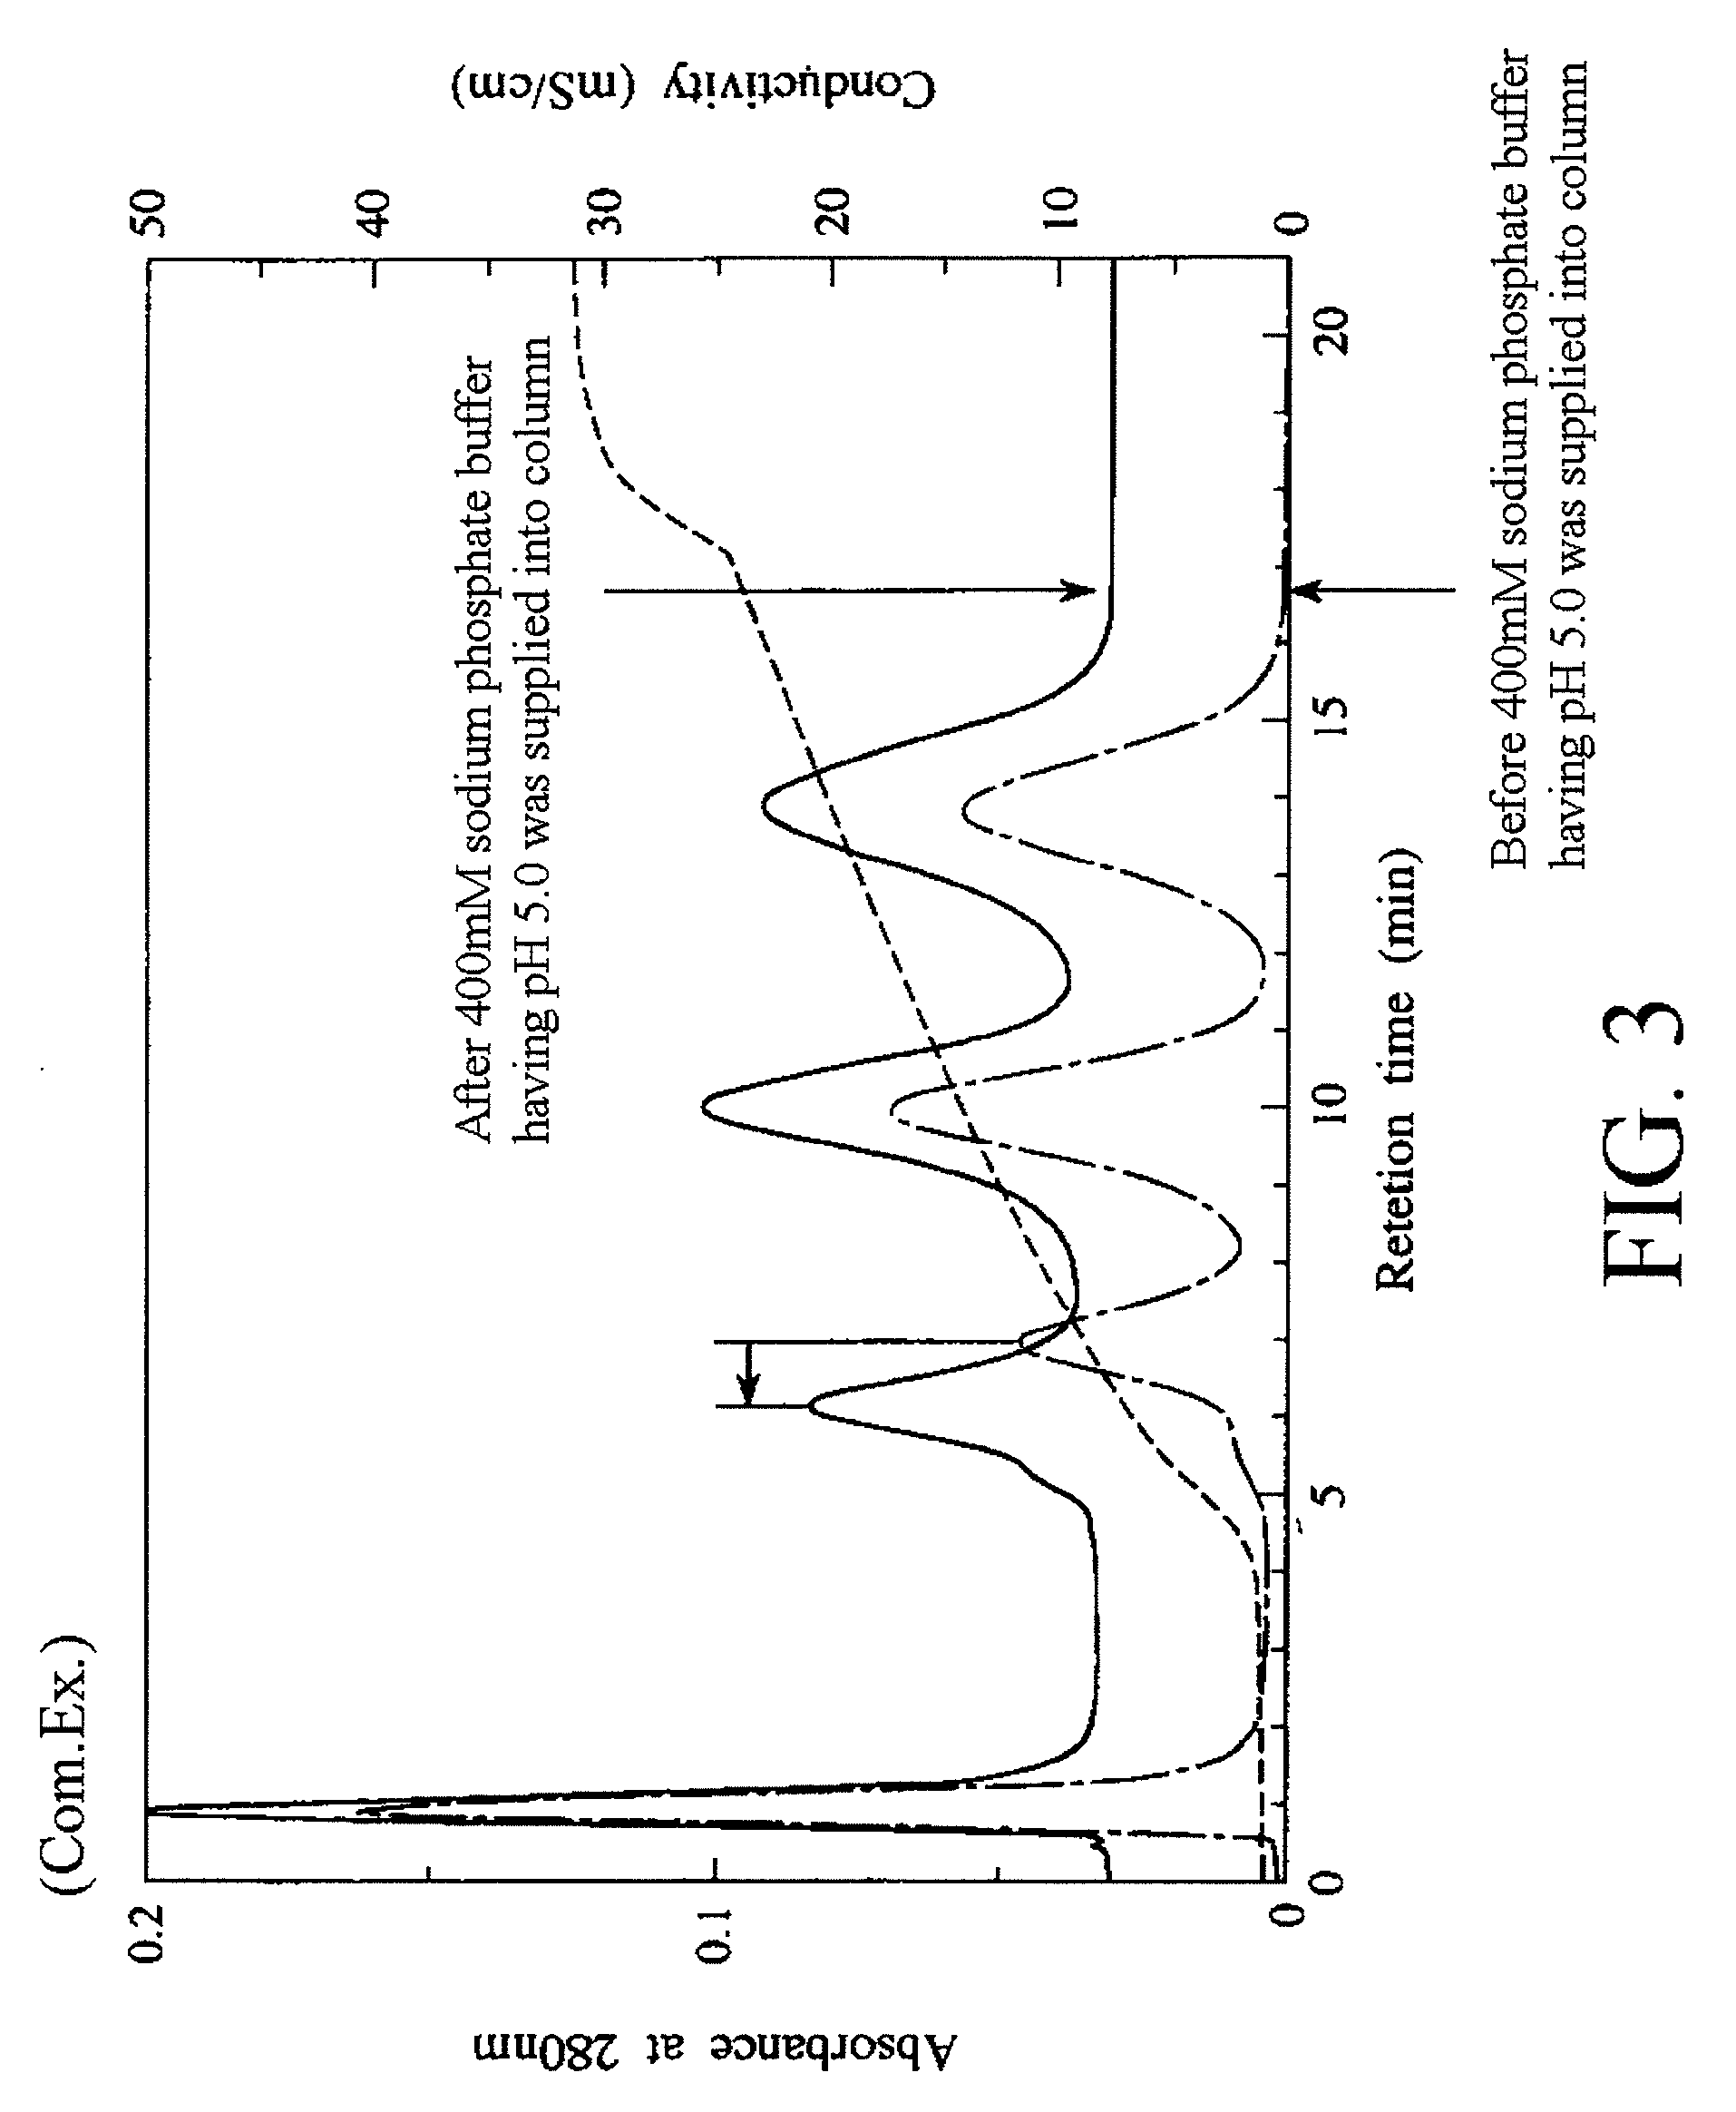 Fluoroapatite dried particles and adsorption apparatus